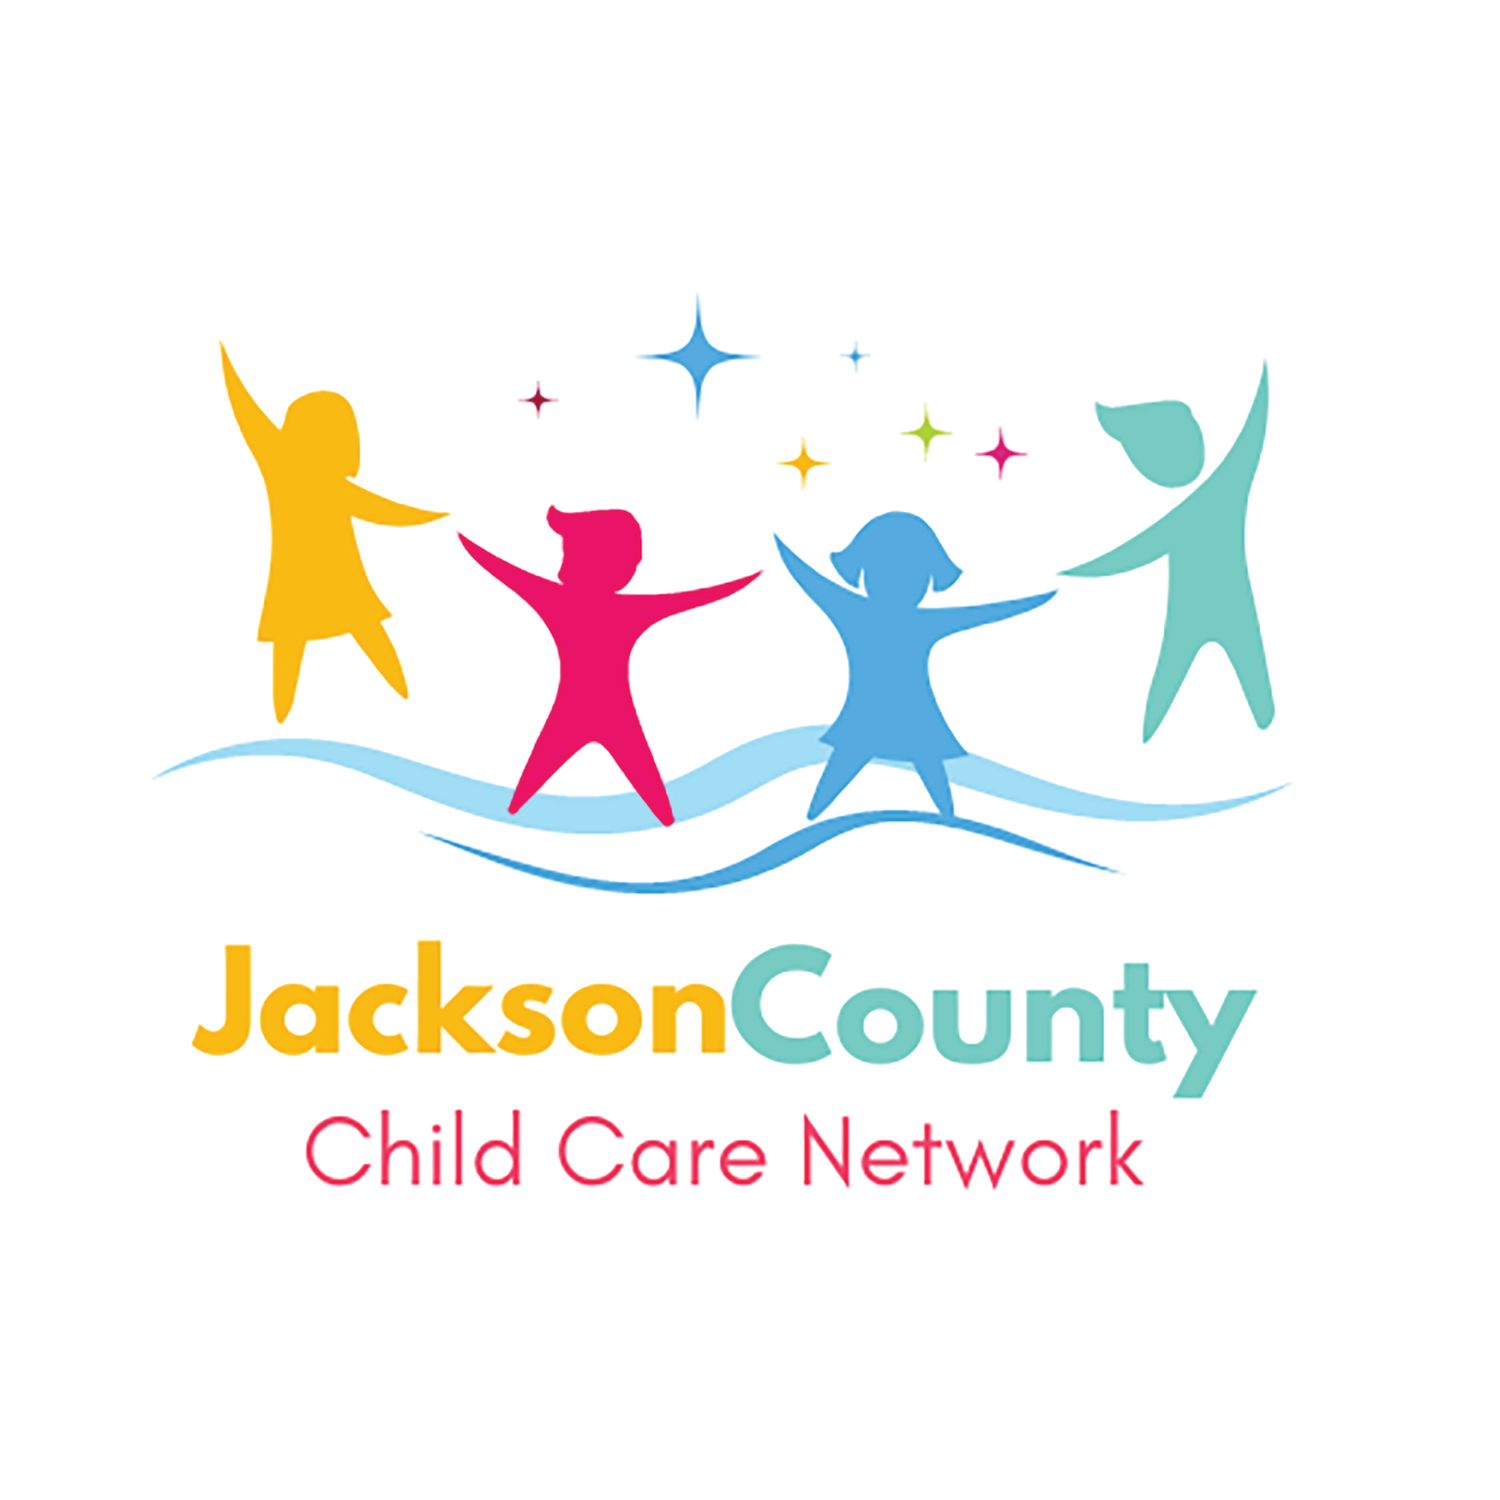 Jackson County Child Care Network